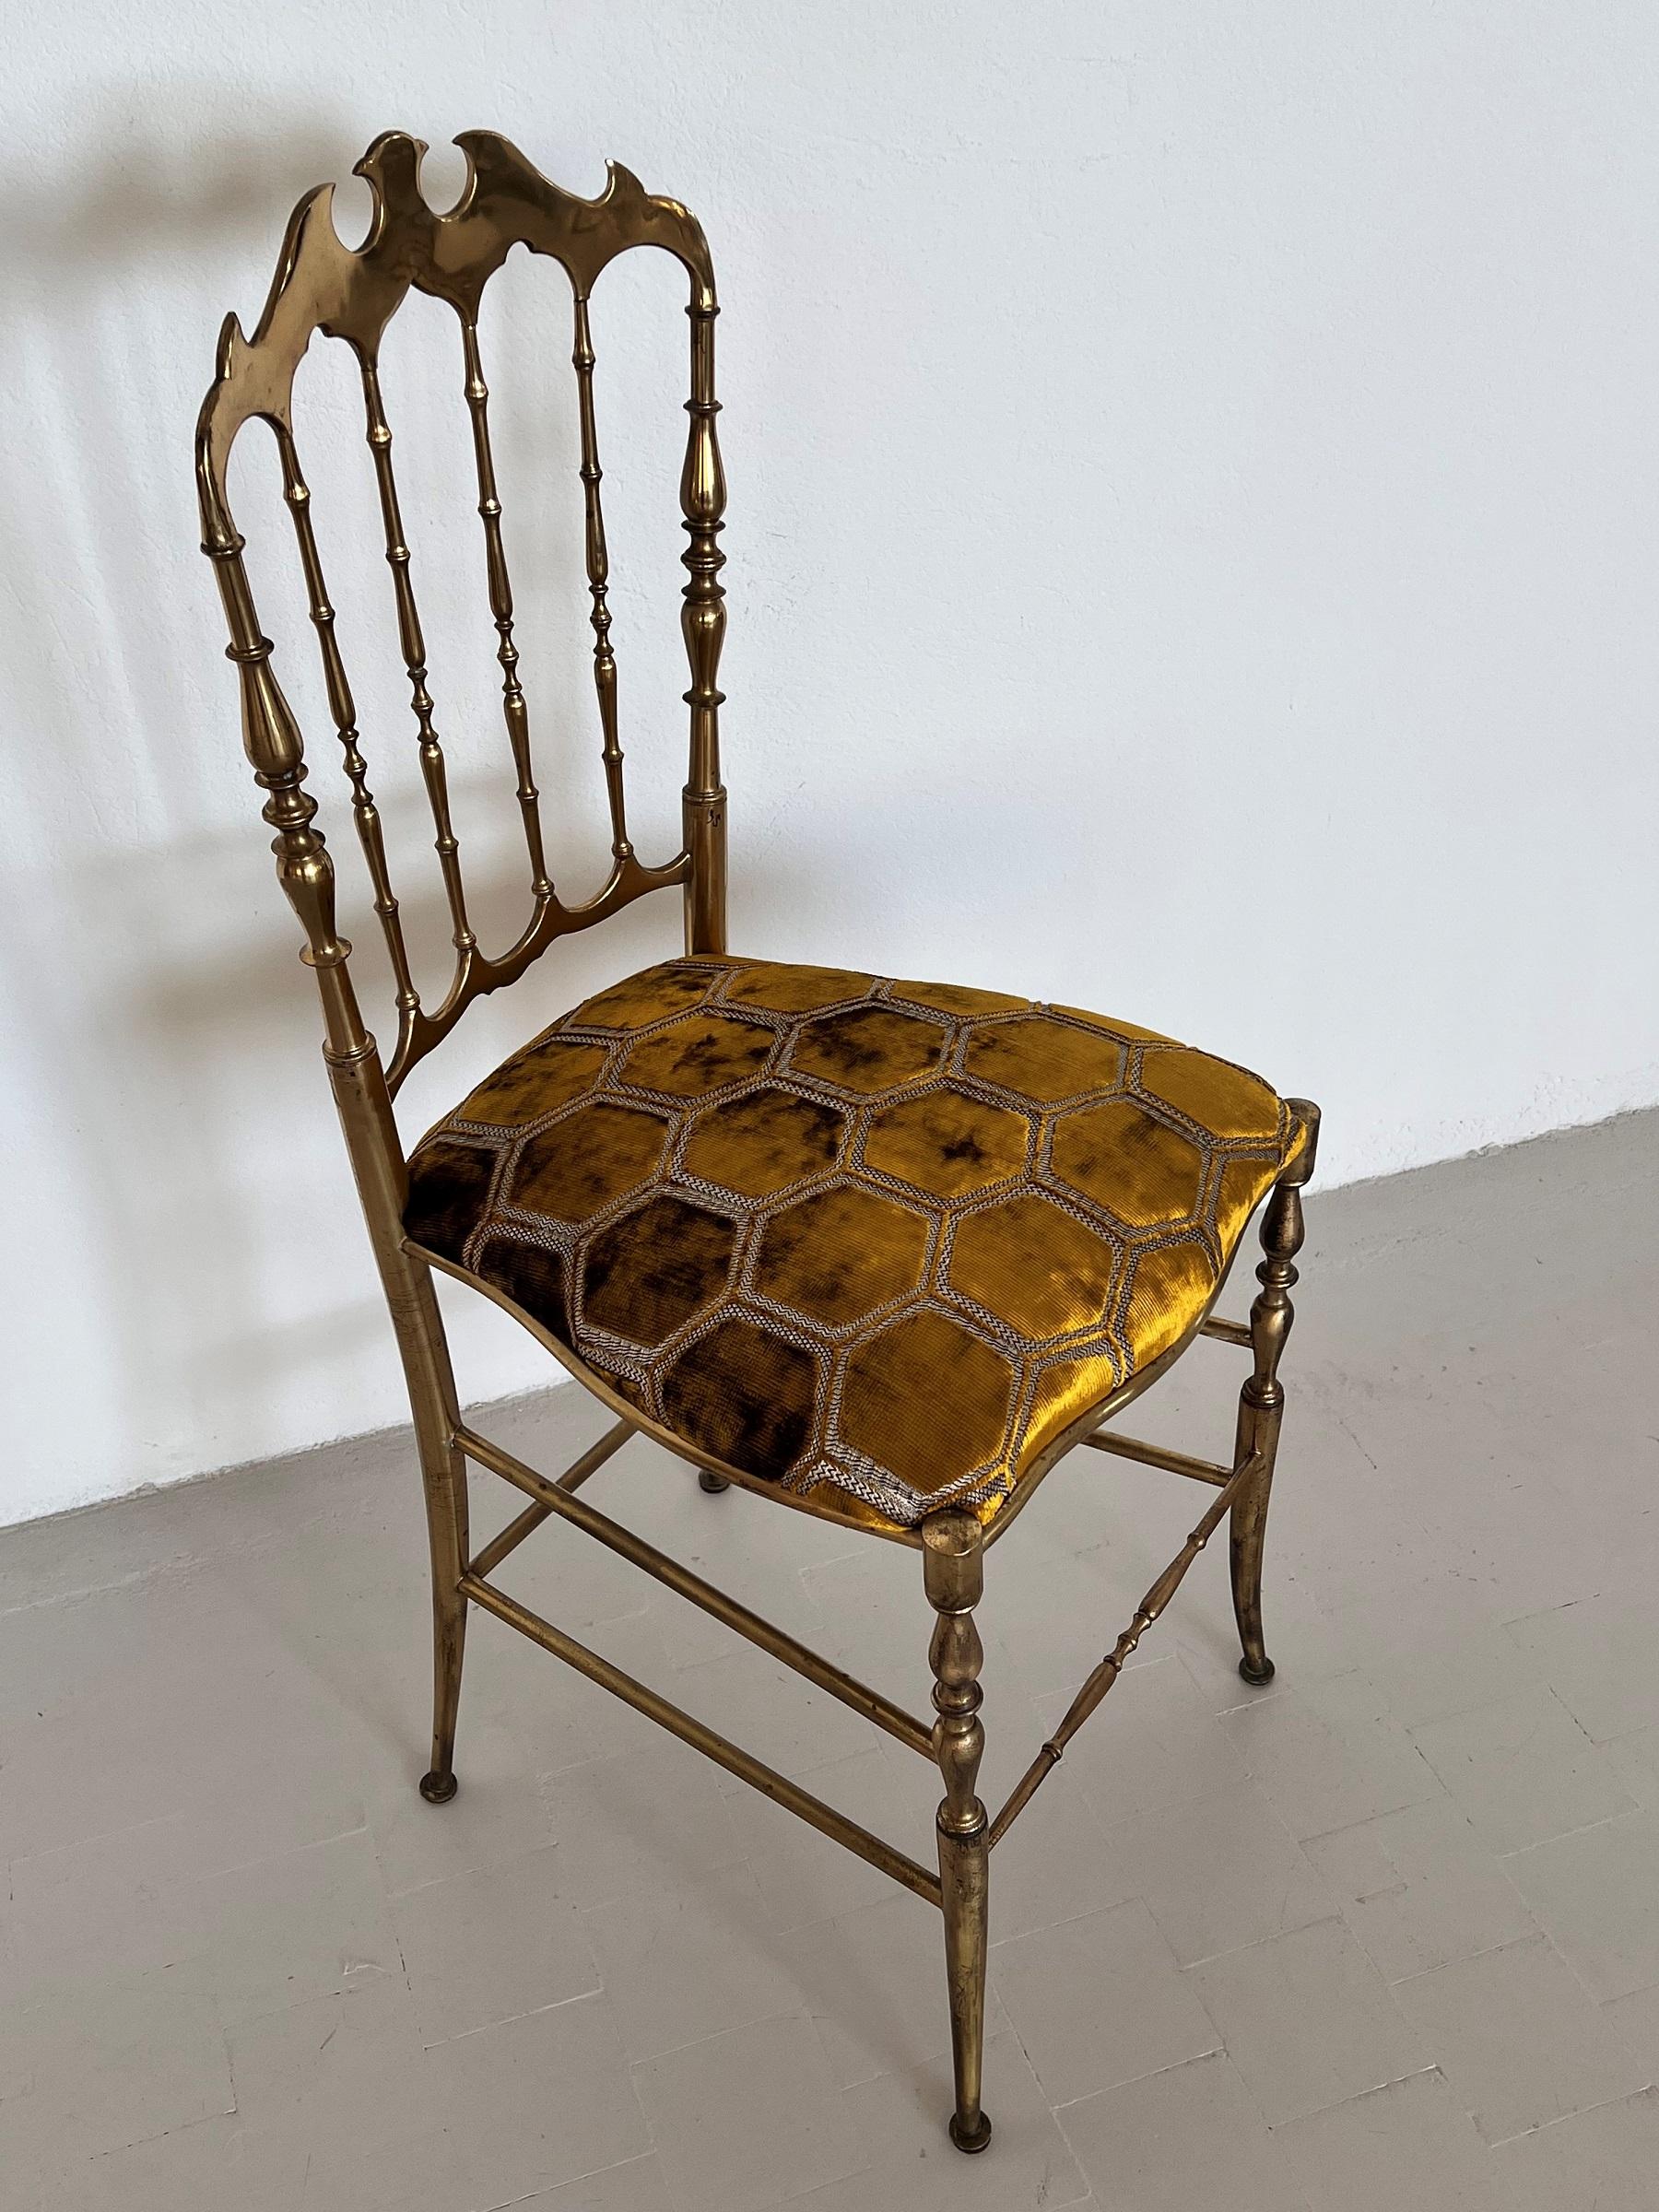 Italian Mid-Century Chiavari Chair in Full Brass with New Upholstery, 1970s For Sale 5